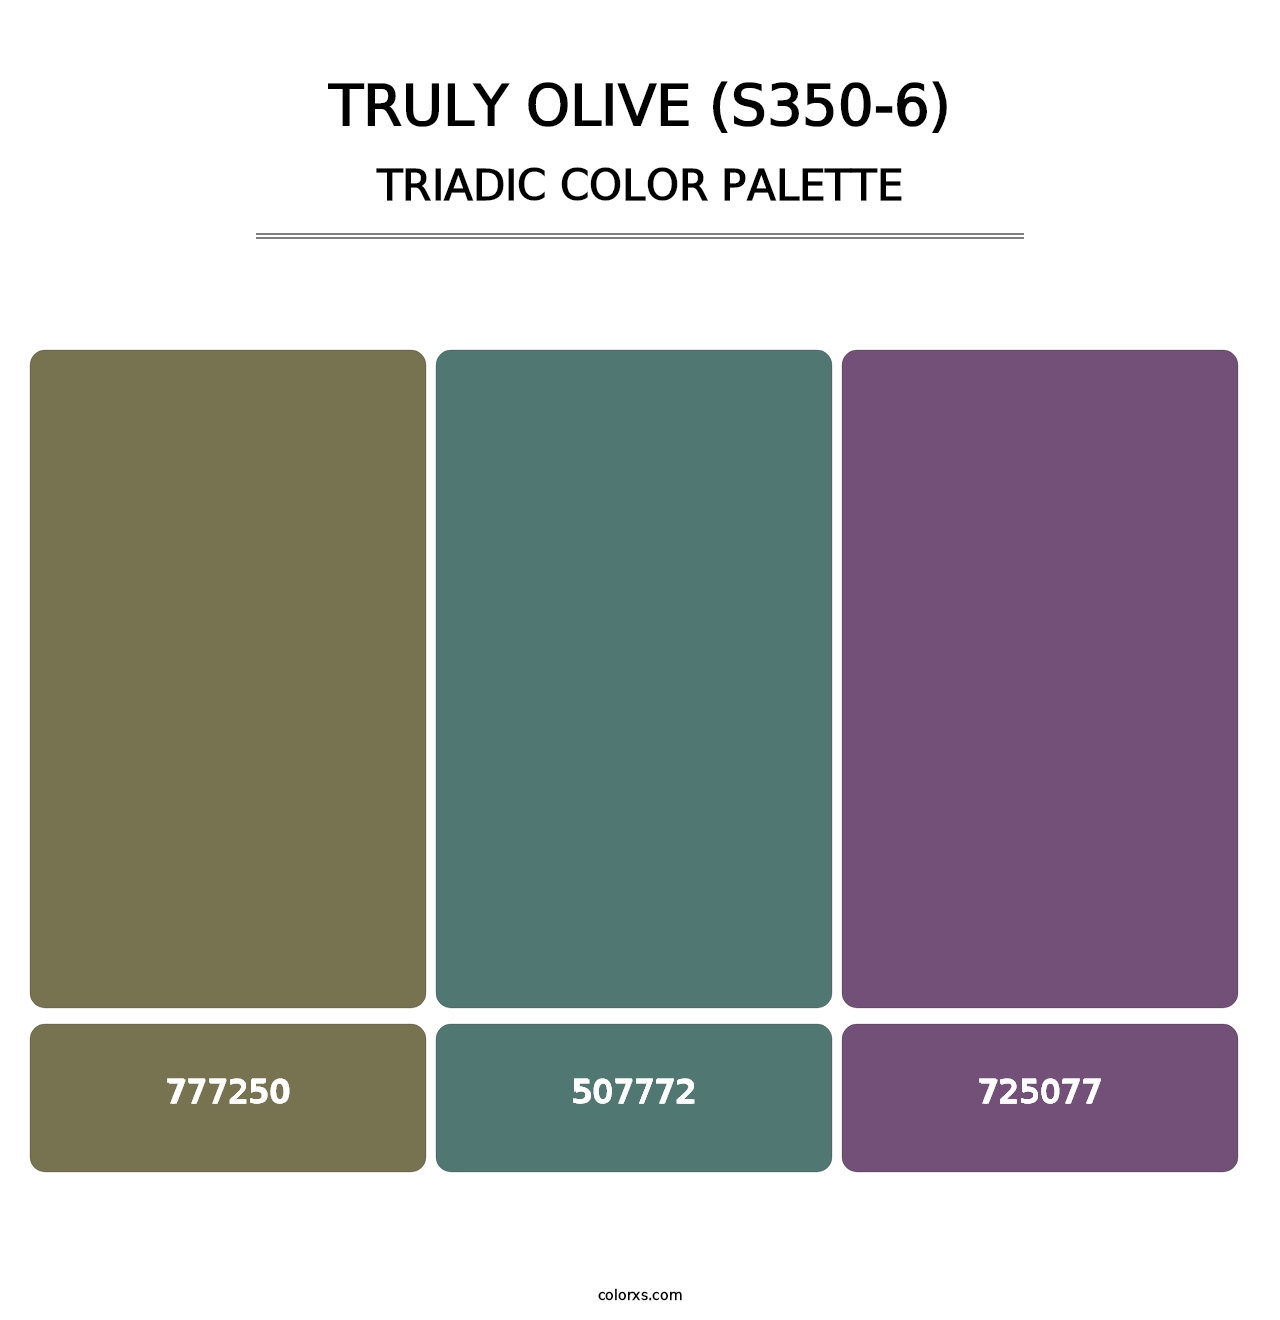 Truly Olive (S350-6) - Triadic Color Palette